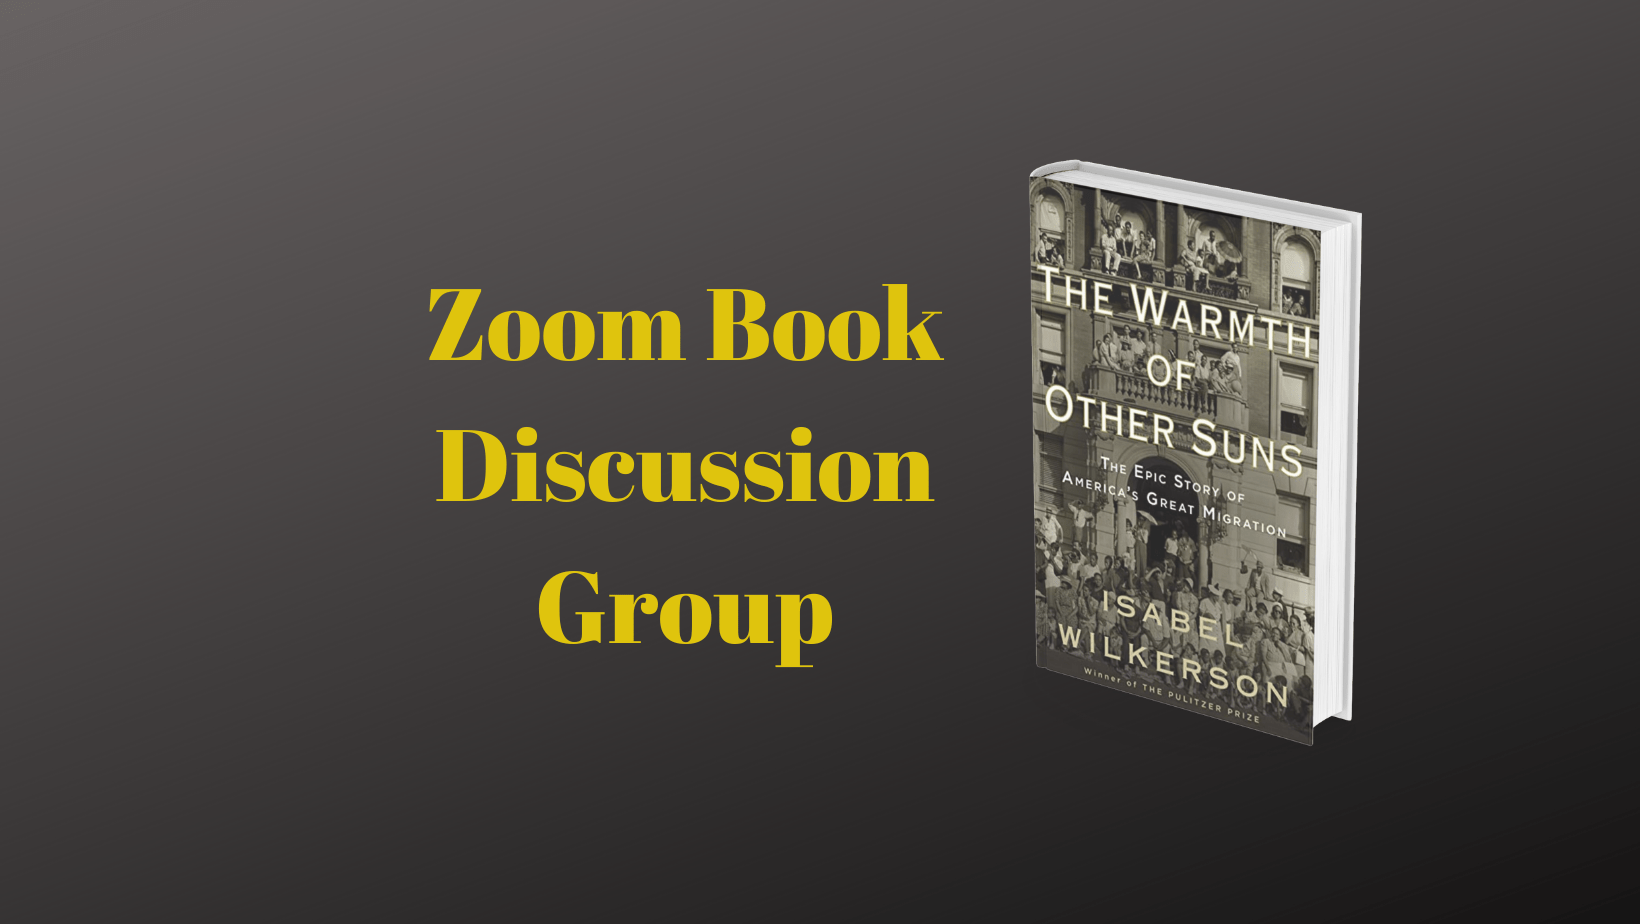 “The Warmth of Other Suns” – A Book Discussion on Zoom